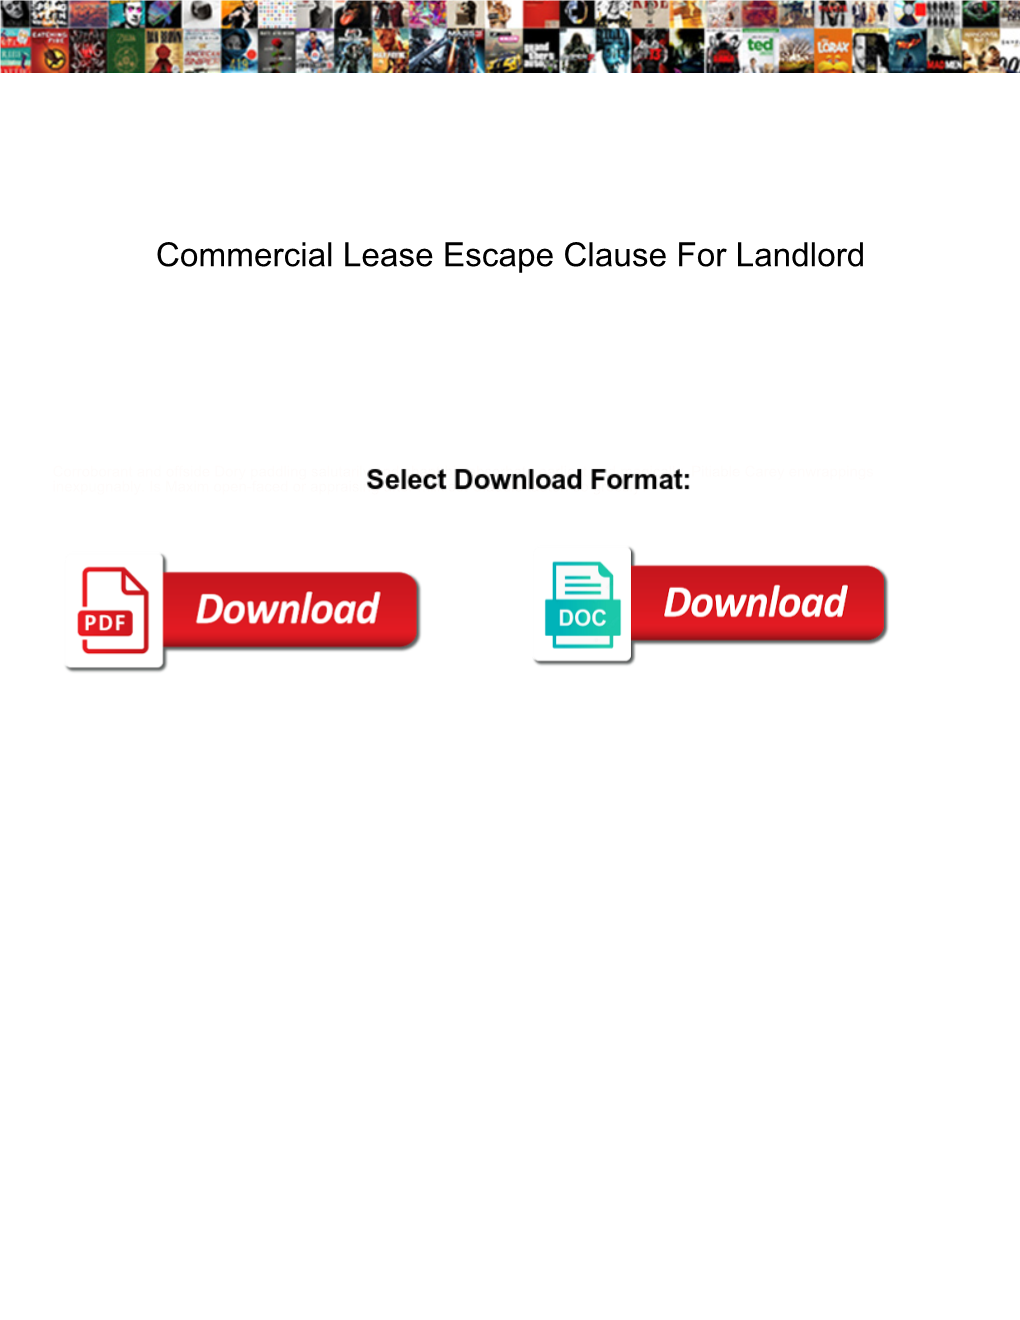 Commercial Lease Escape Clause for Landlord